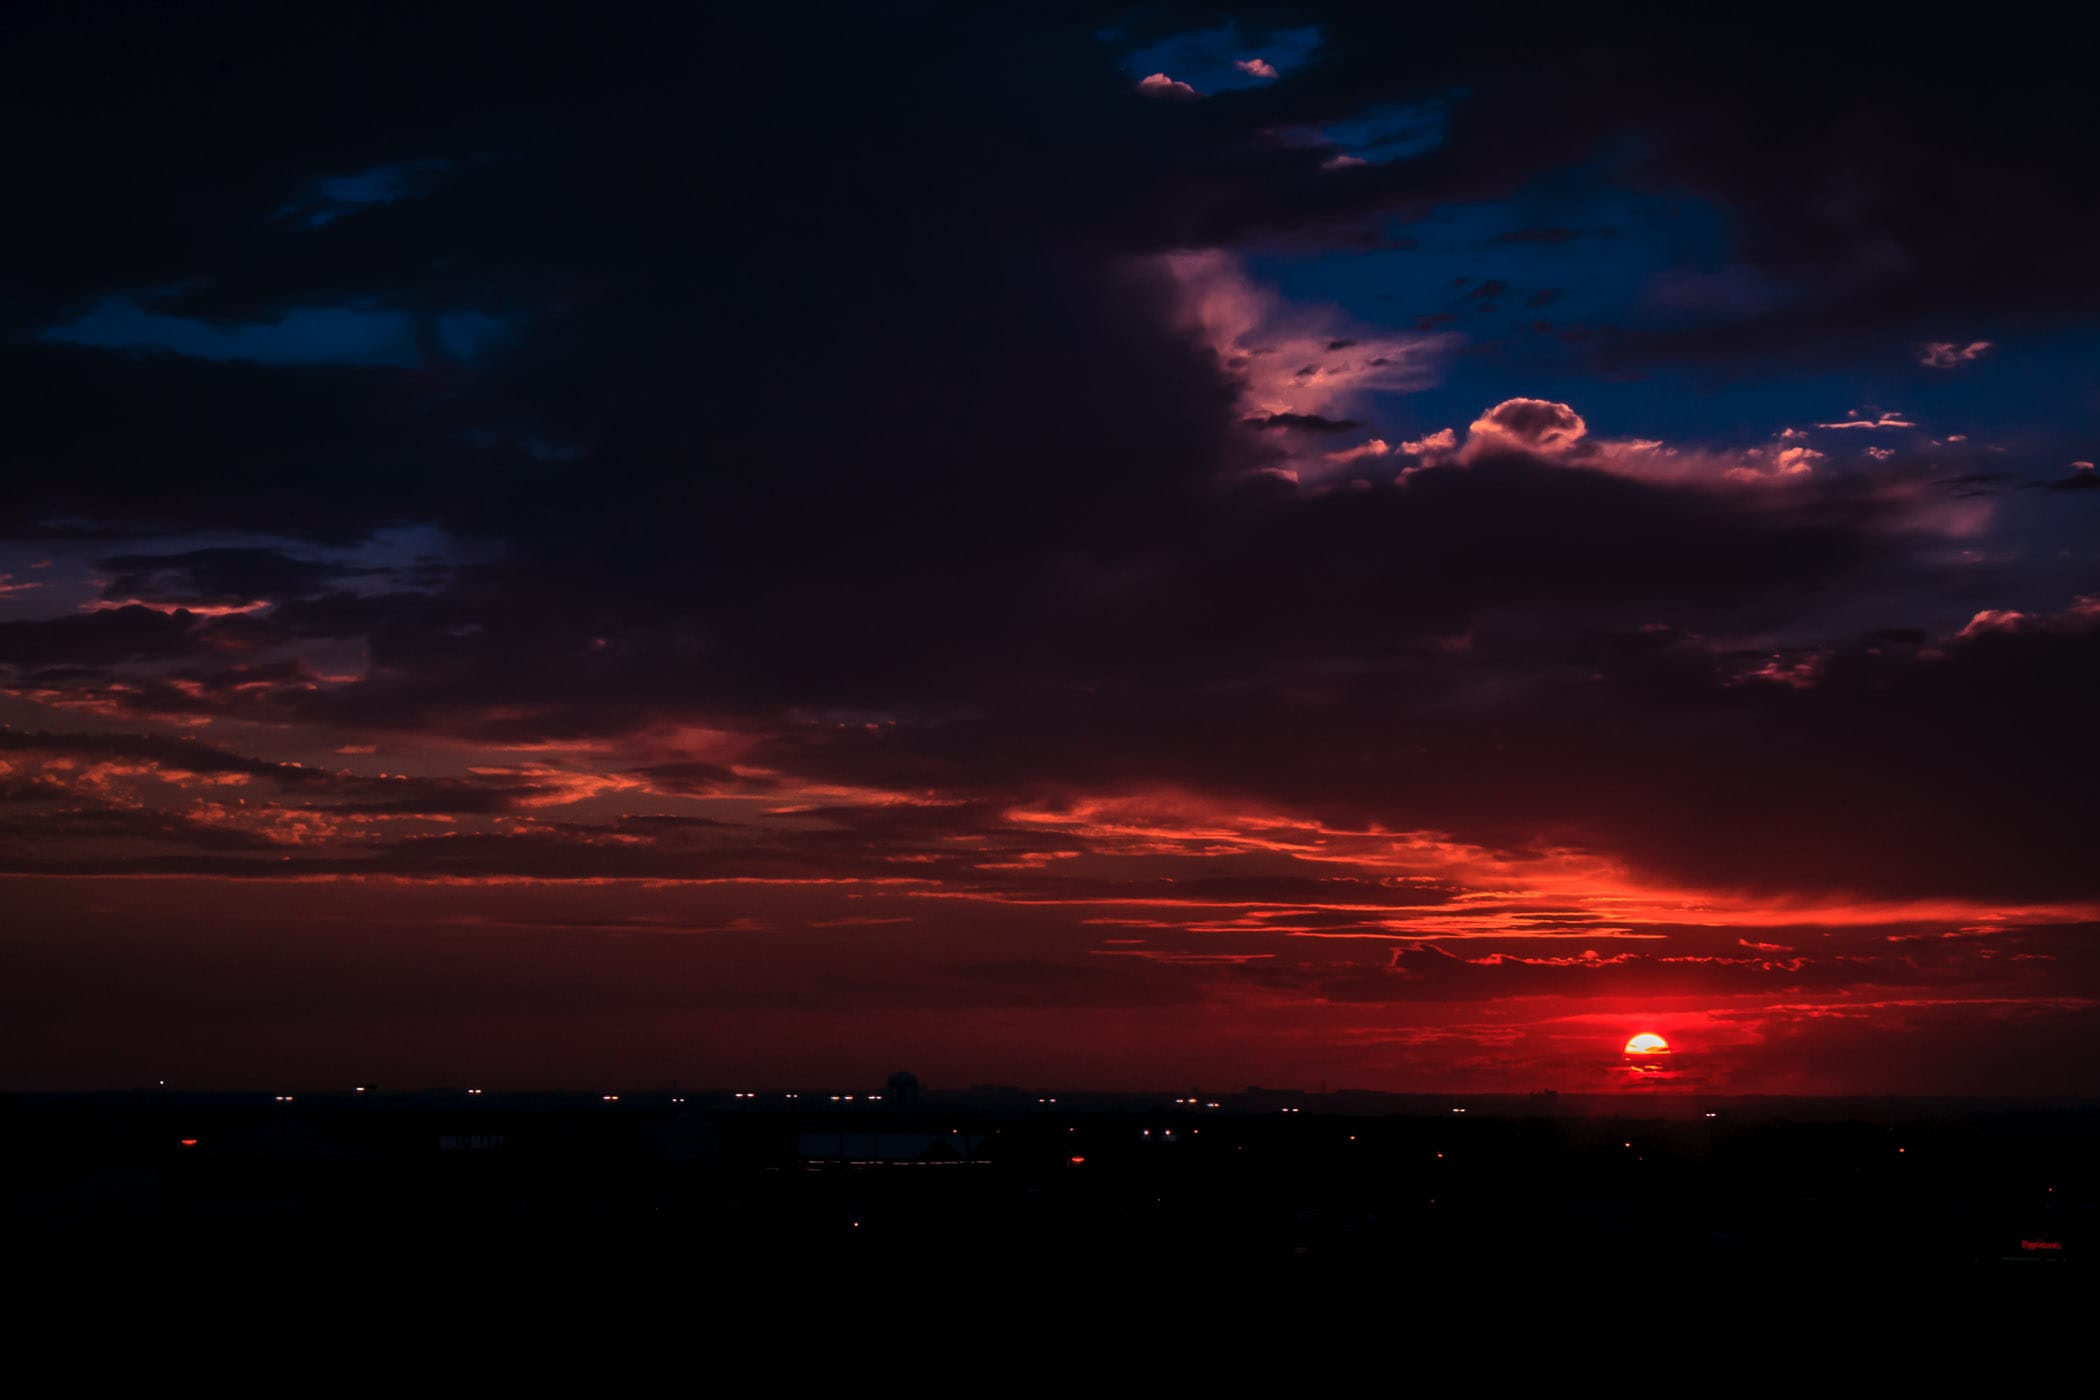 The sun setting over the western part of the Dallas-Fort Worth Metroplex.